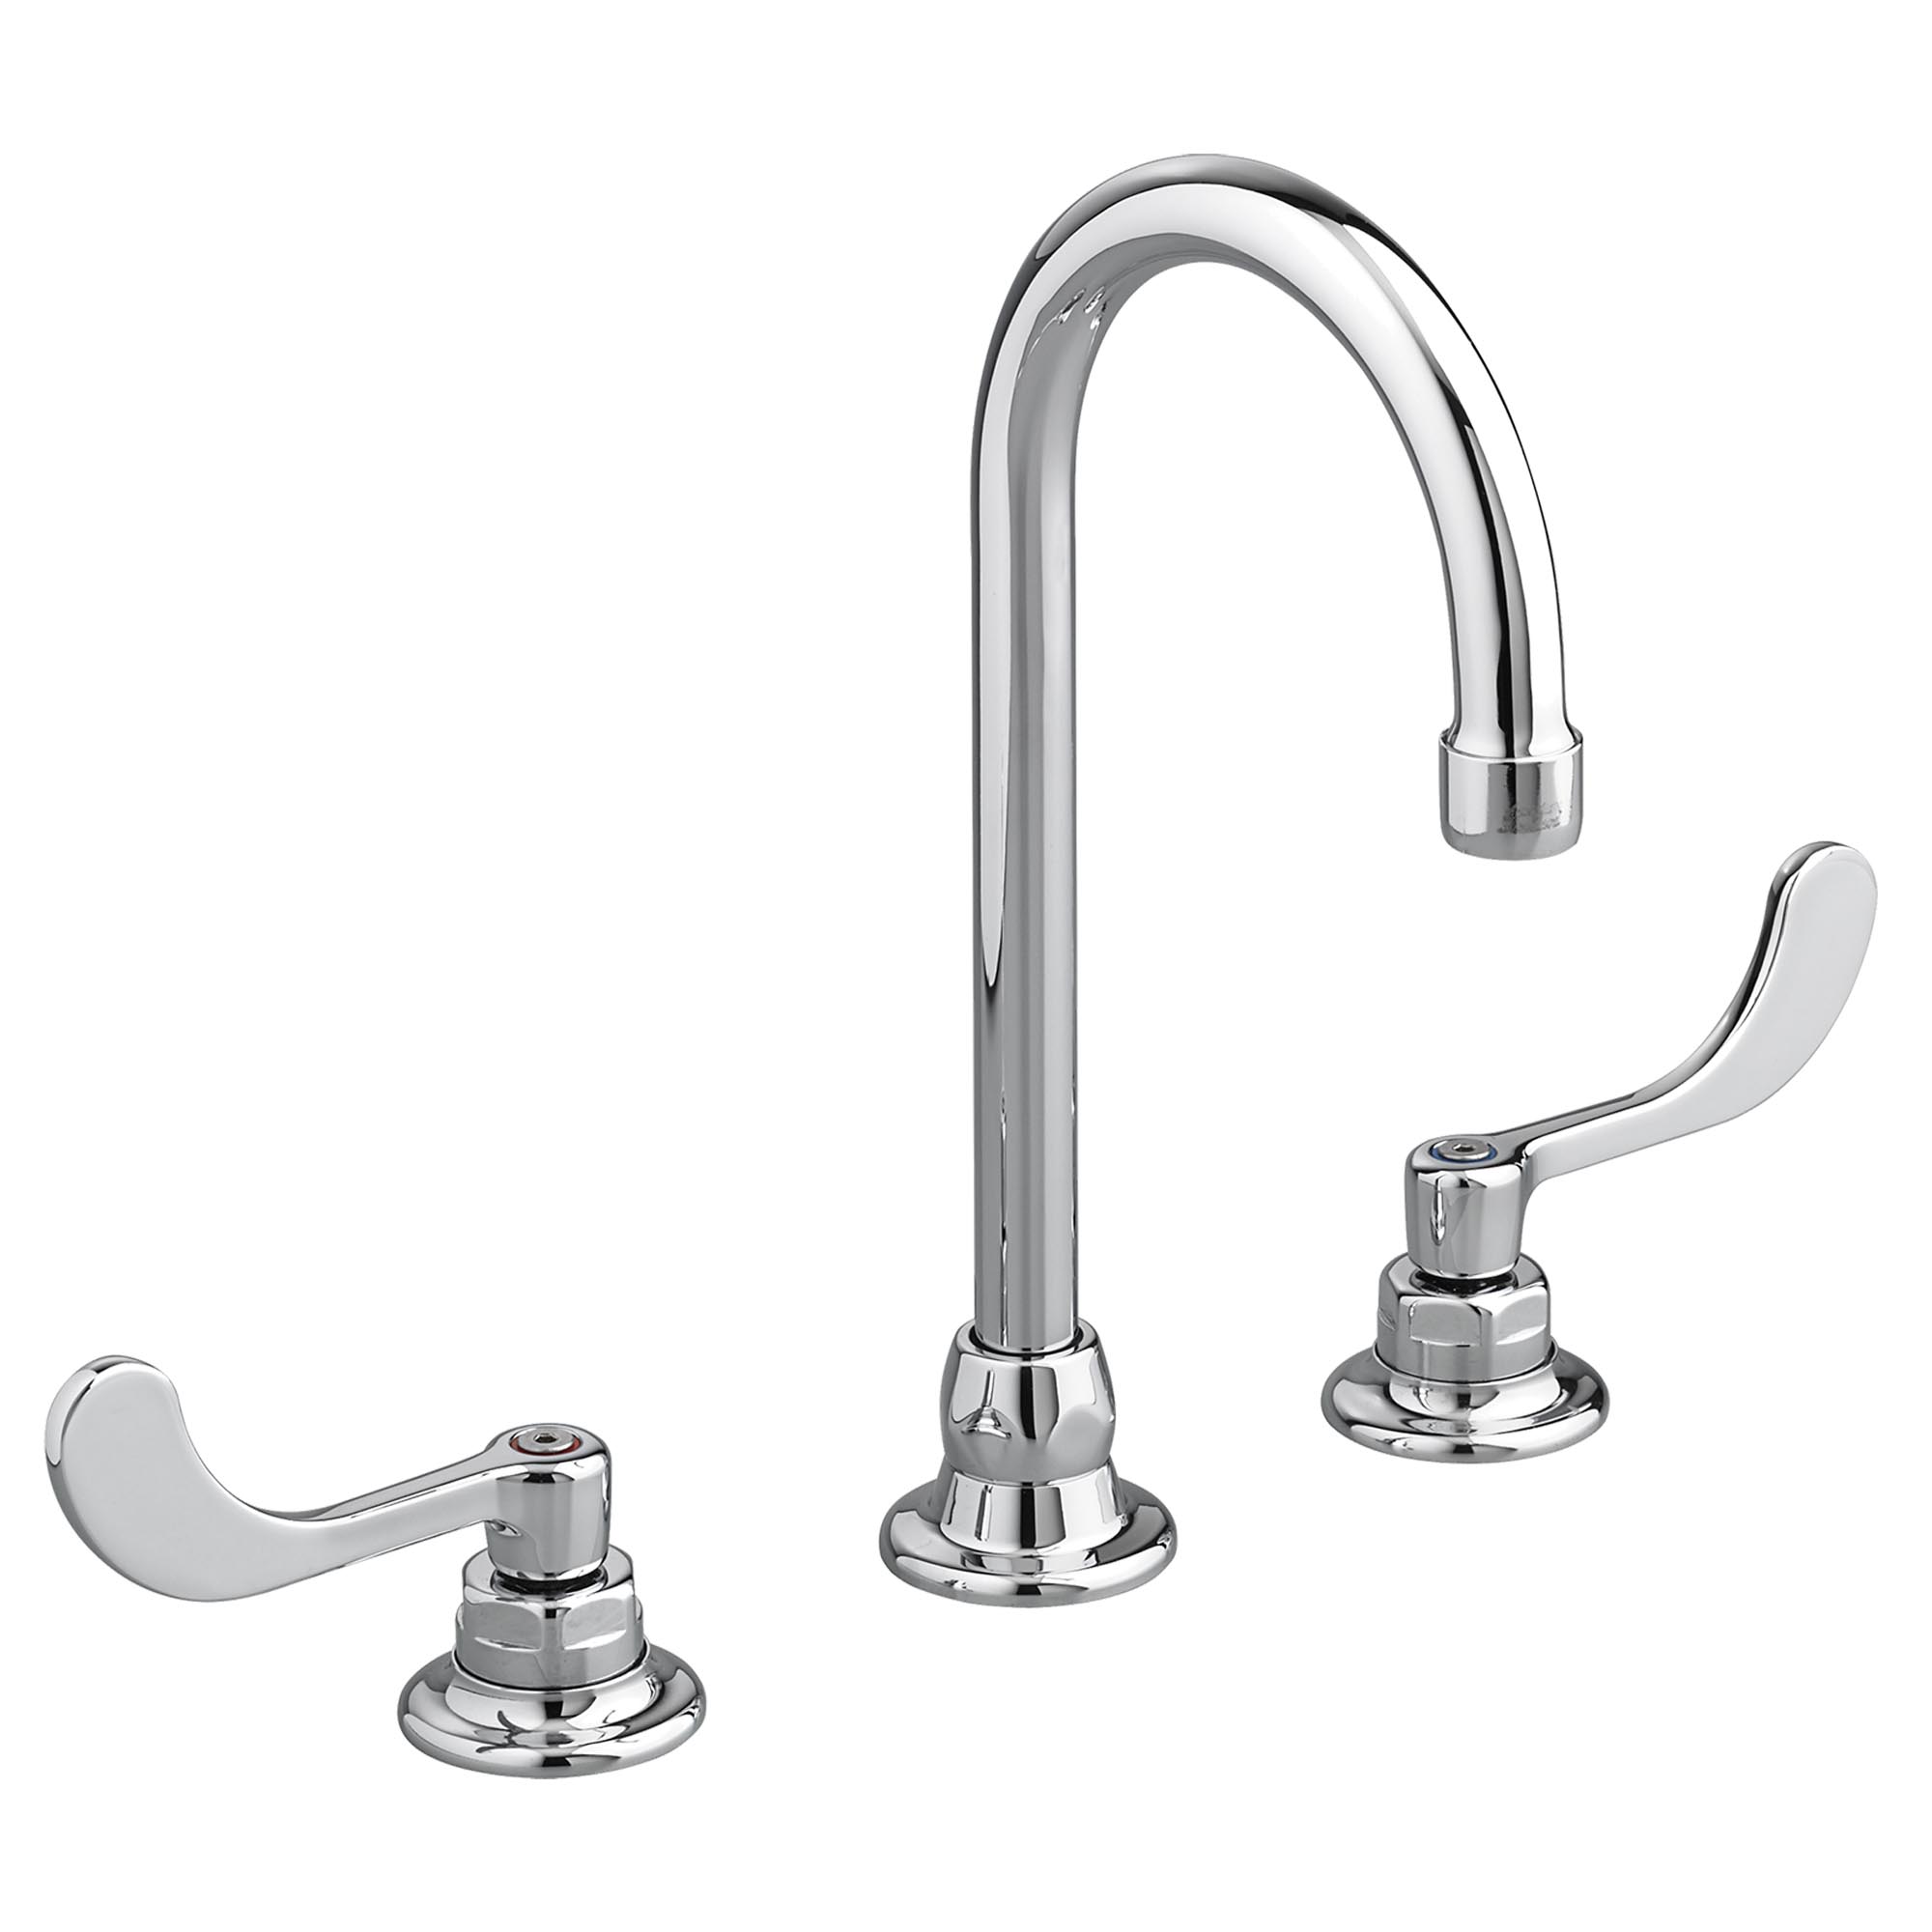 Monterrey™ 8-Inch Widespread Gooseneck Faucet With Wrist Blade Handles 1.5  gpm/5.7 Lpm With